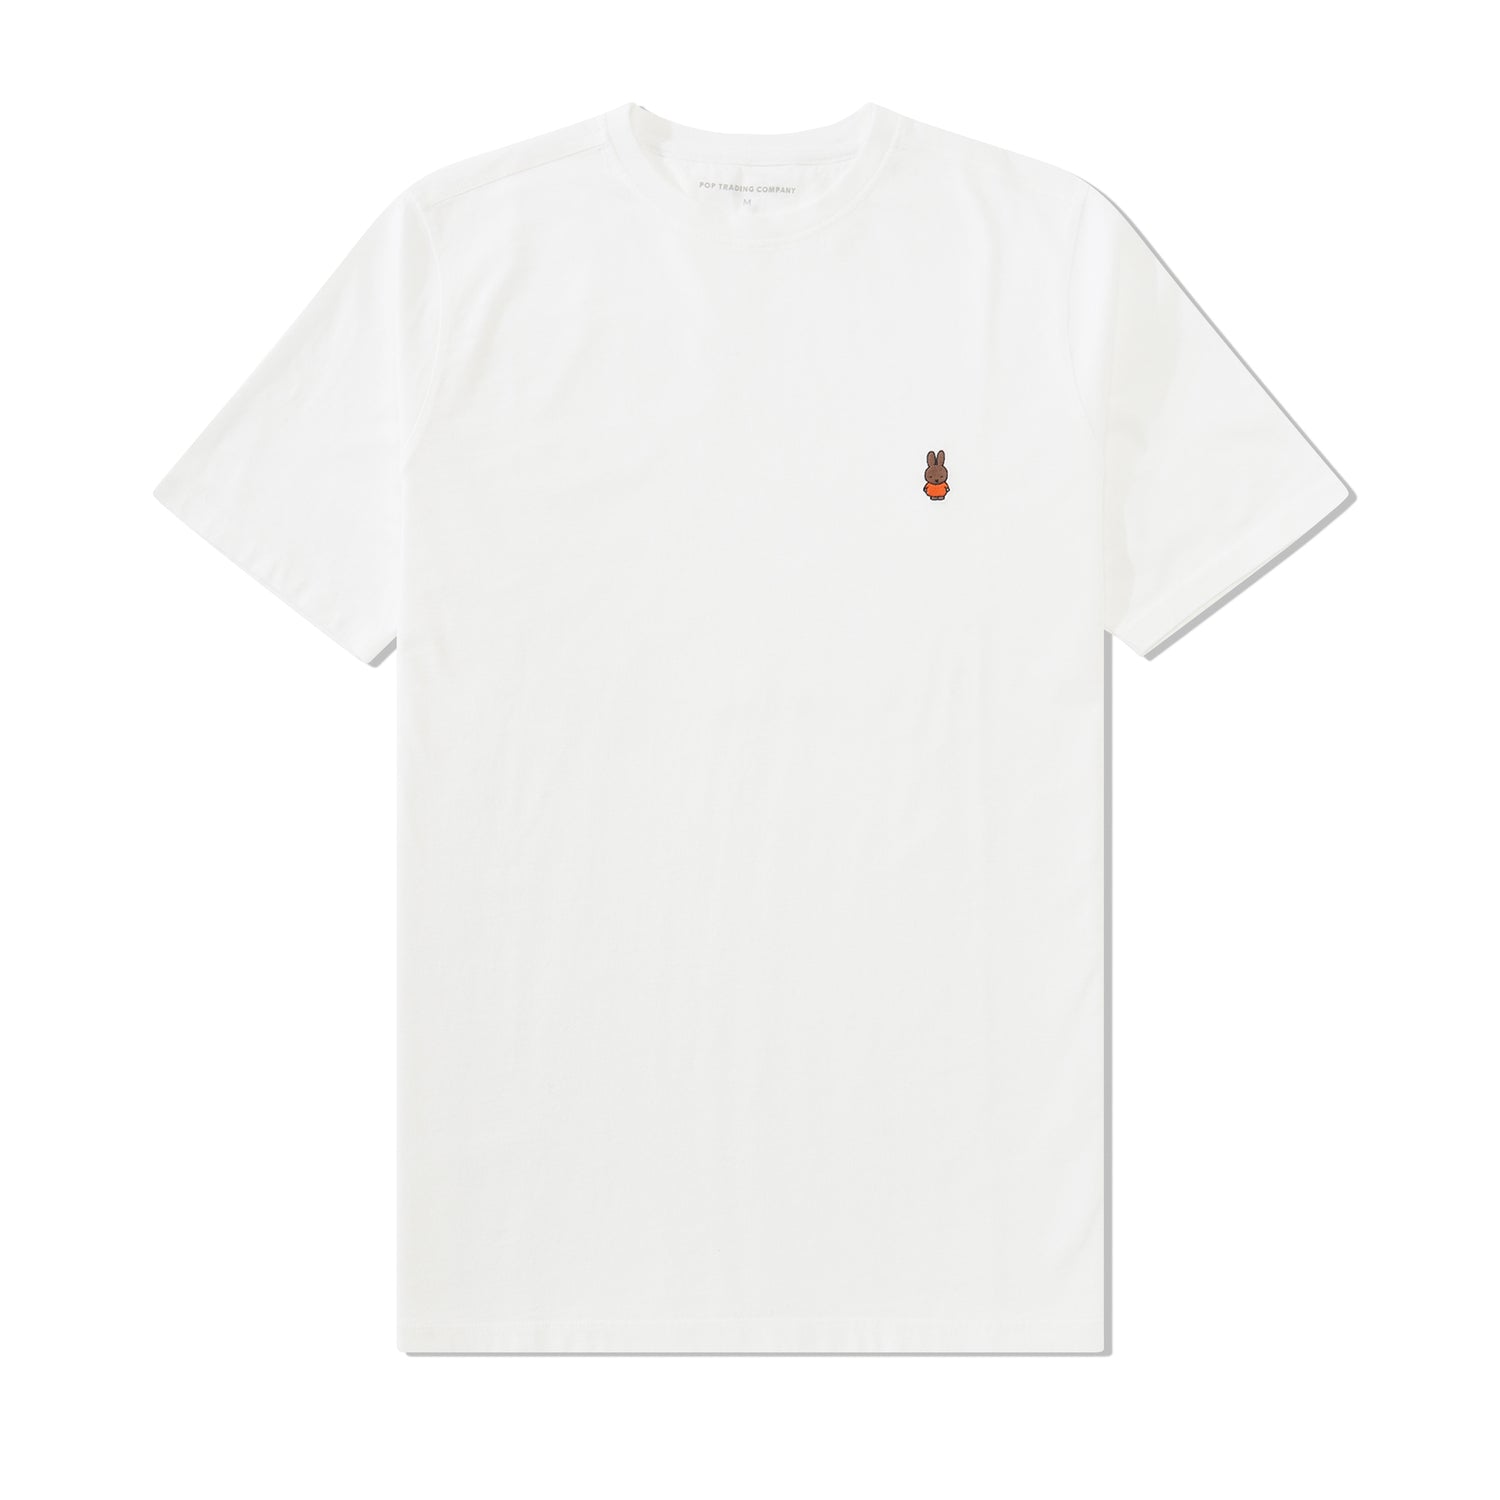 Miffy Embroidered Tee, White